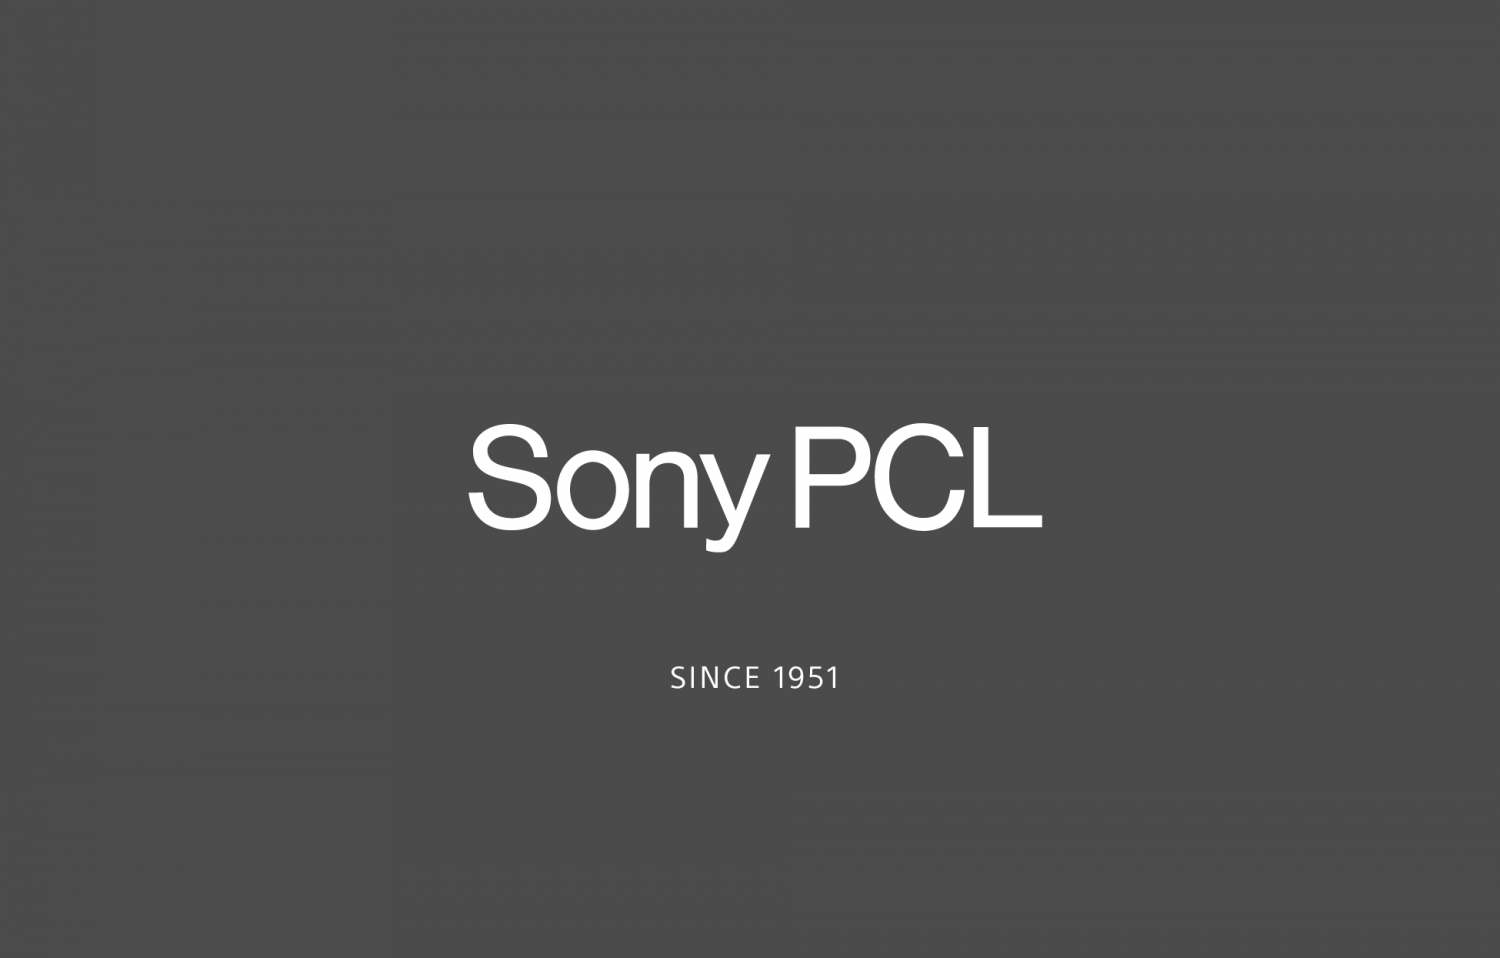 SonyPCL SINCE1951